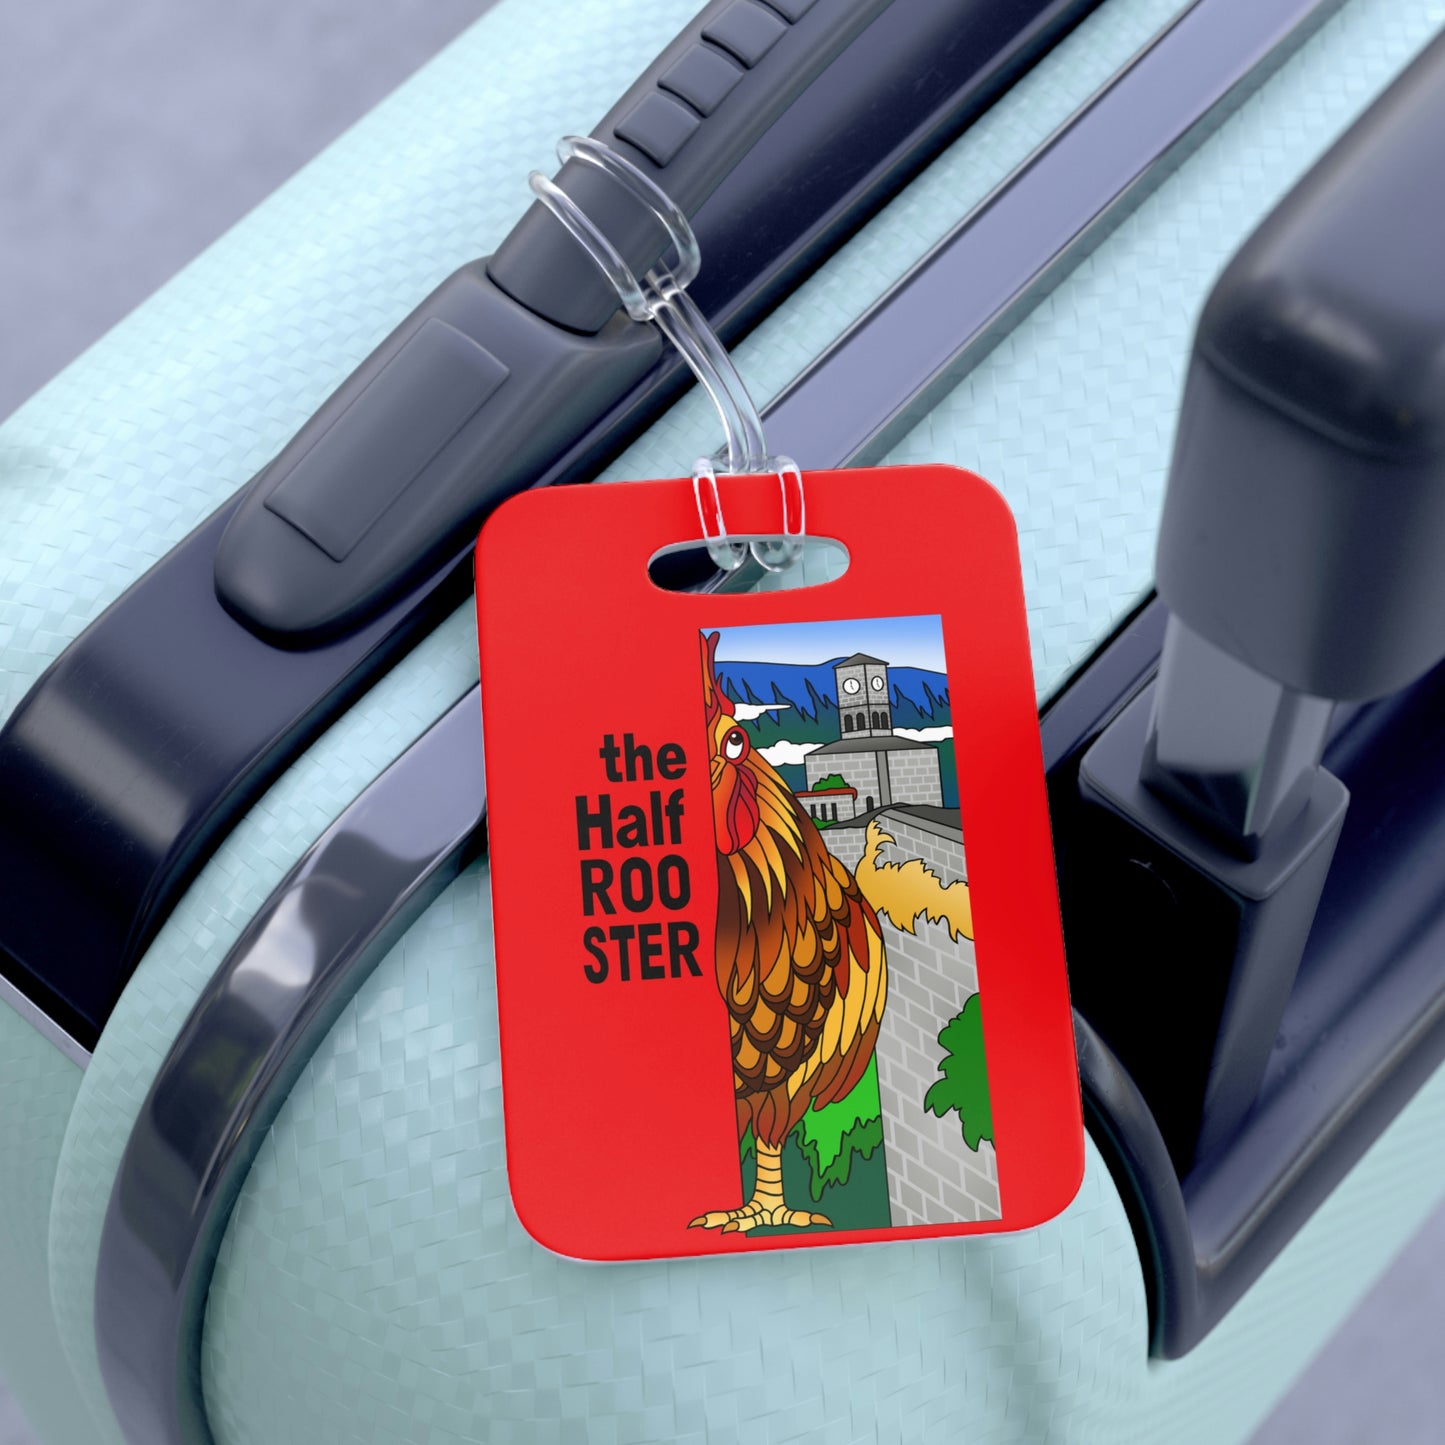 The Half Rooster Bag Tag